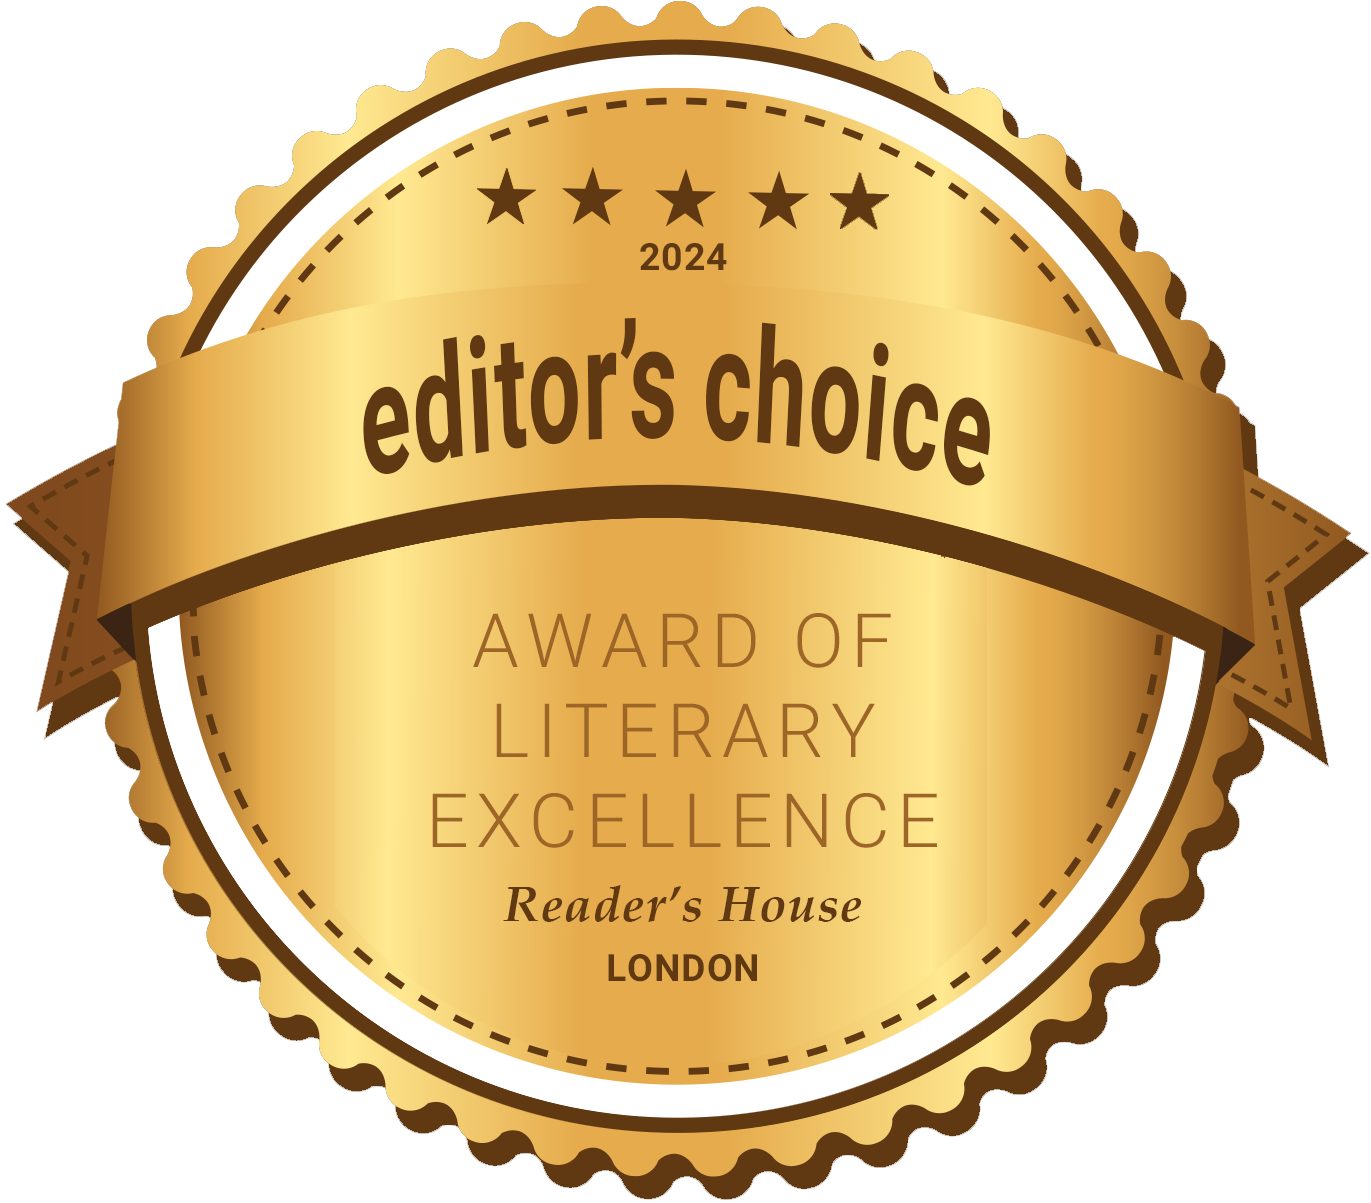 Award of Literary Excellence Reader’s House London presented to Carolyn Armstrong